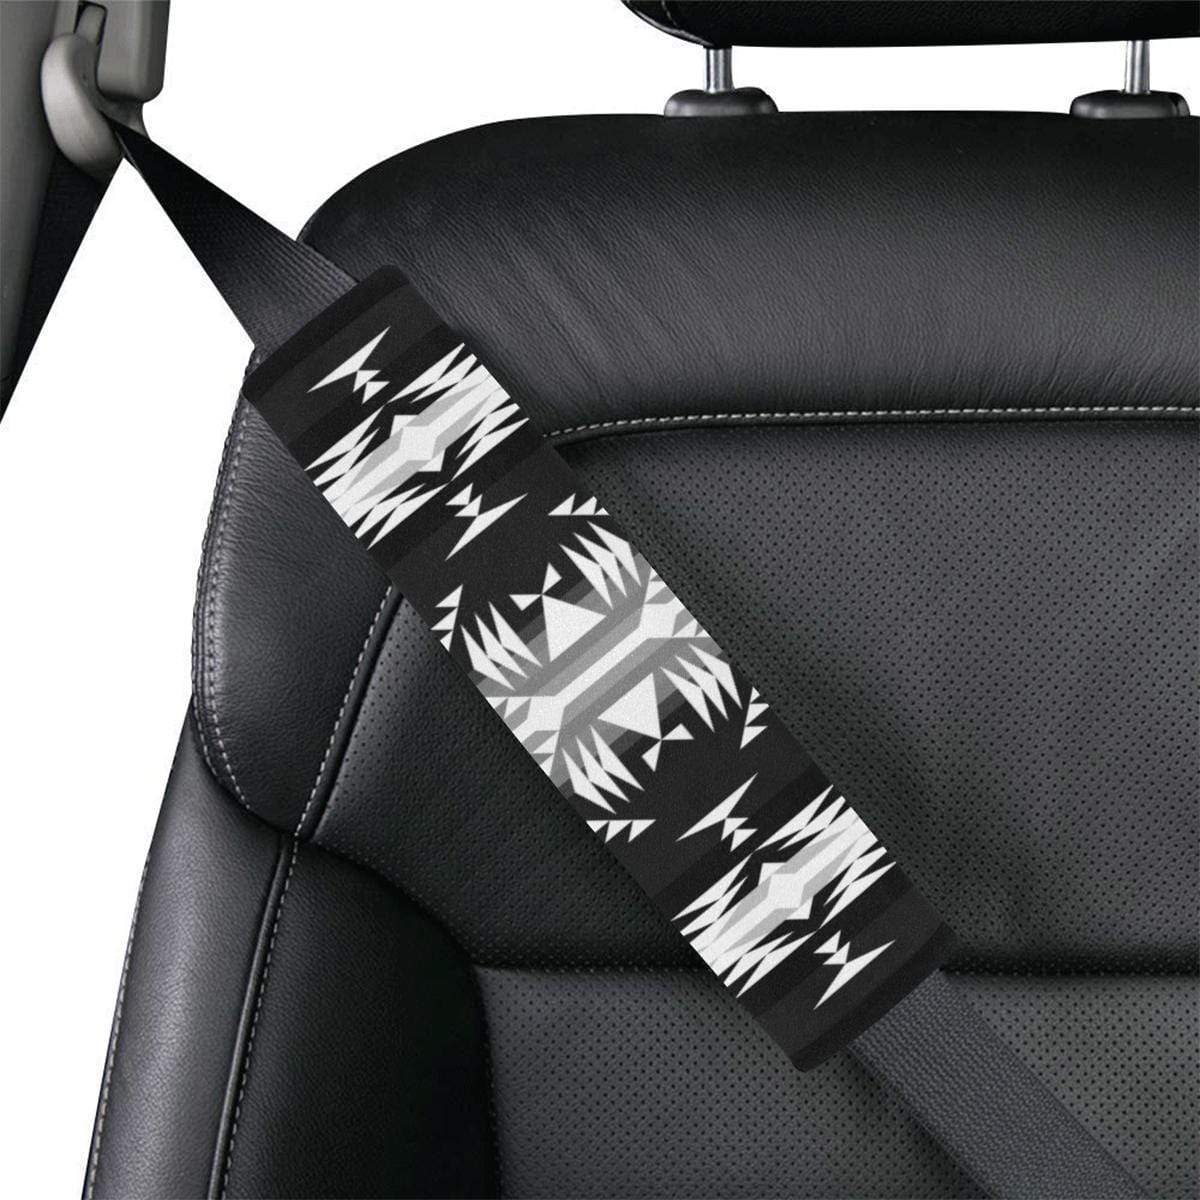 Between the Mountains Black and White Car Seat Belt Cover 7''x12.6'' Car Seat Belt Cover 7''x12.6'' e-joyer 